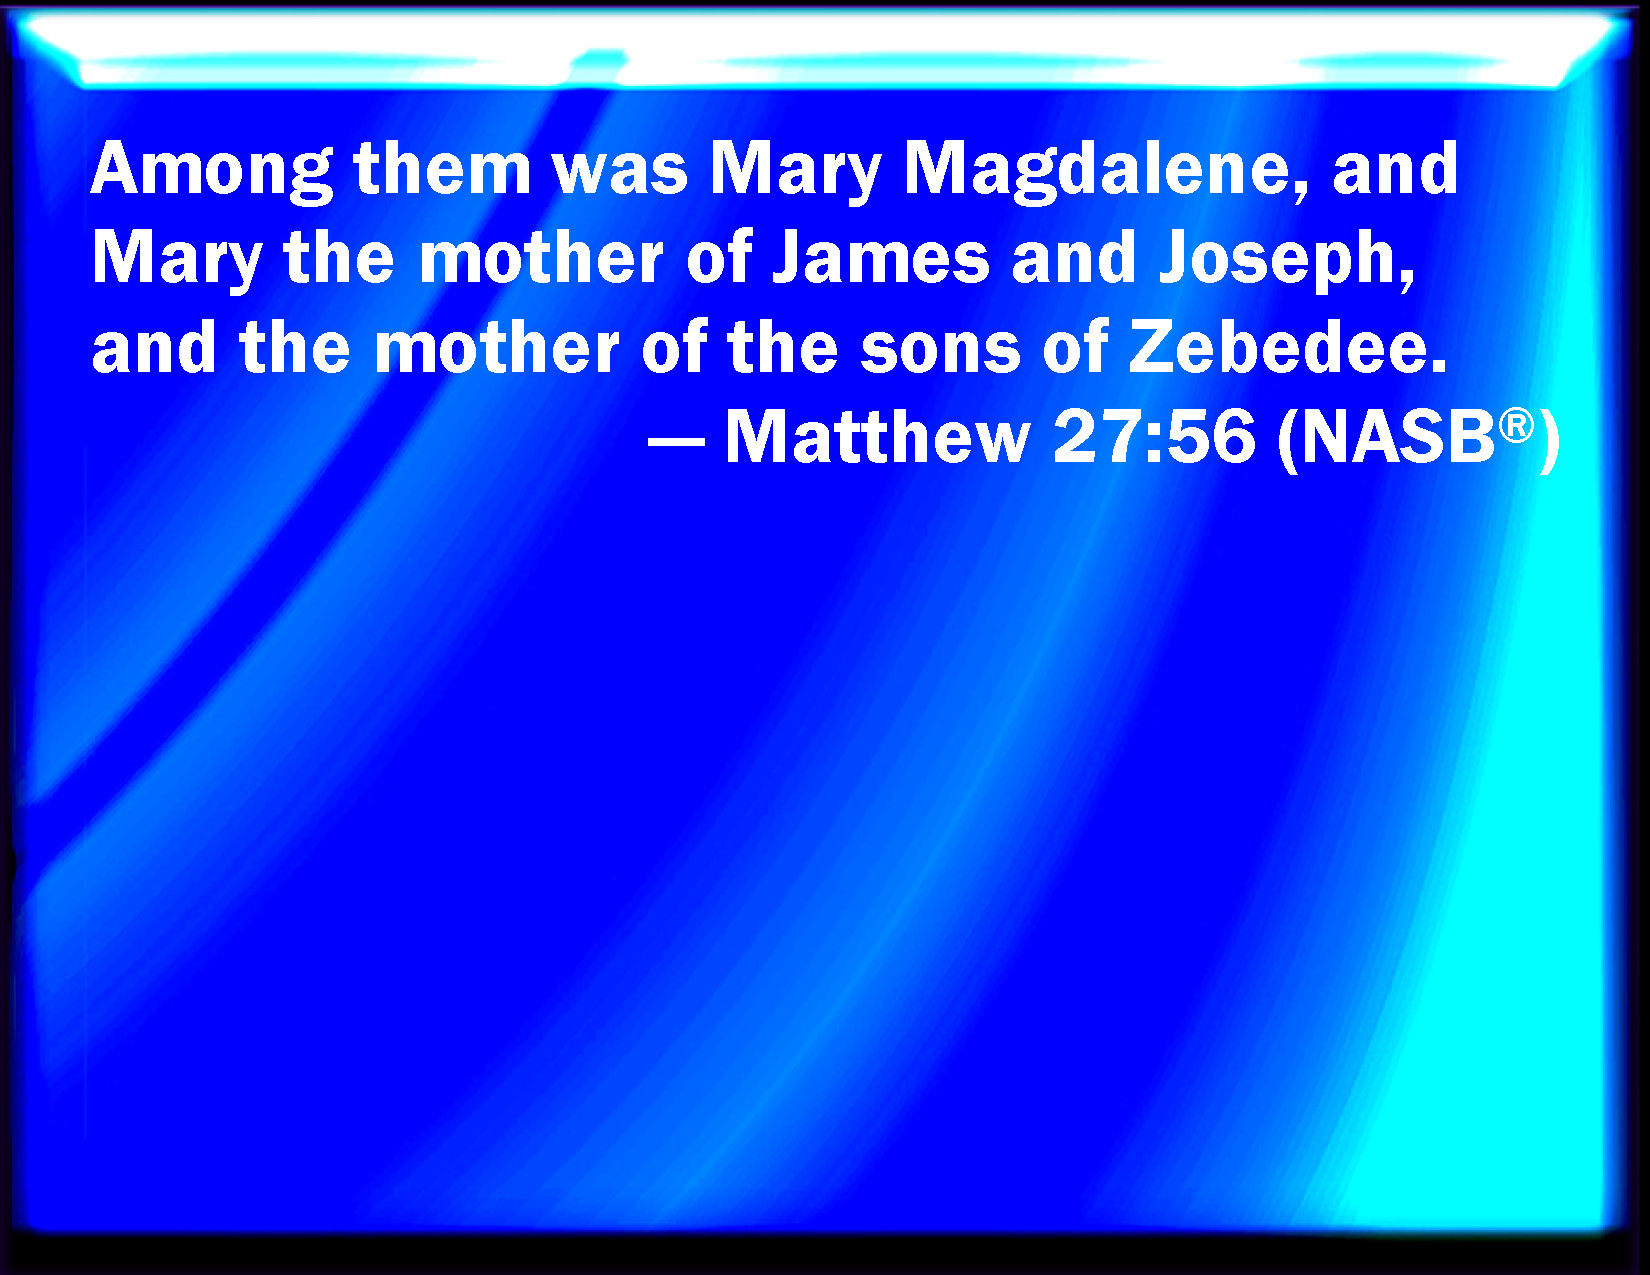 Matthew 27:56 Among which was Mary Magdalene, and Mary the mother of James  and Joses, and the mother of Zebedees children.